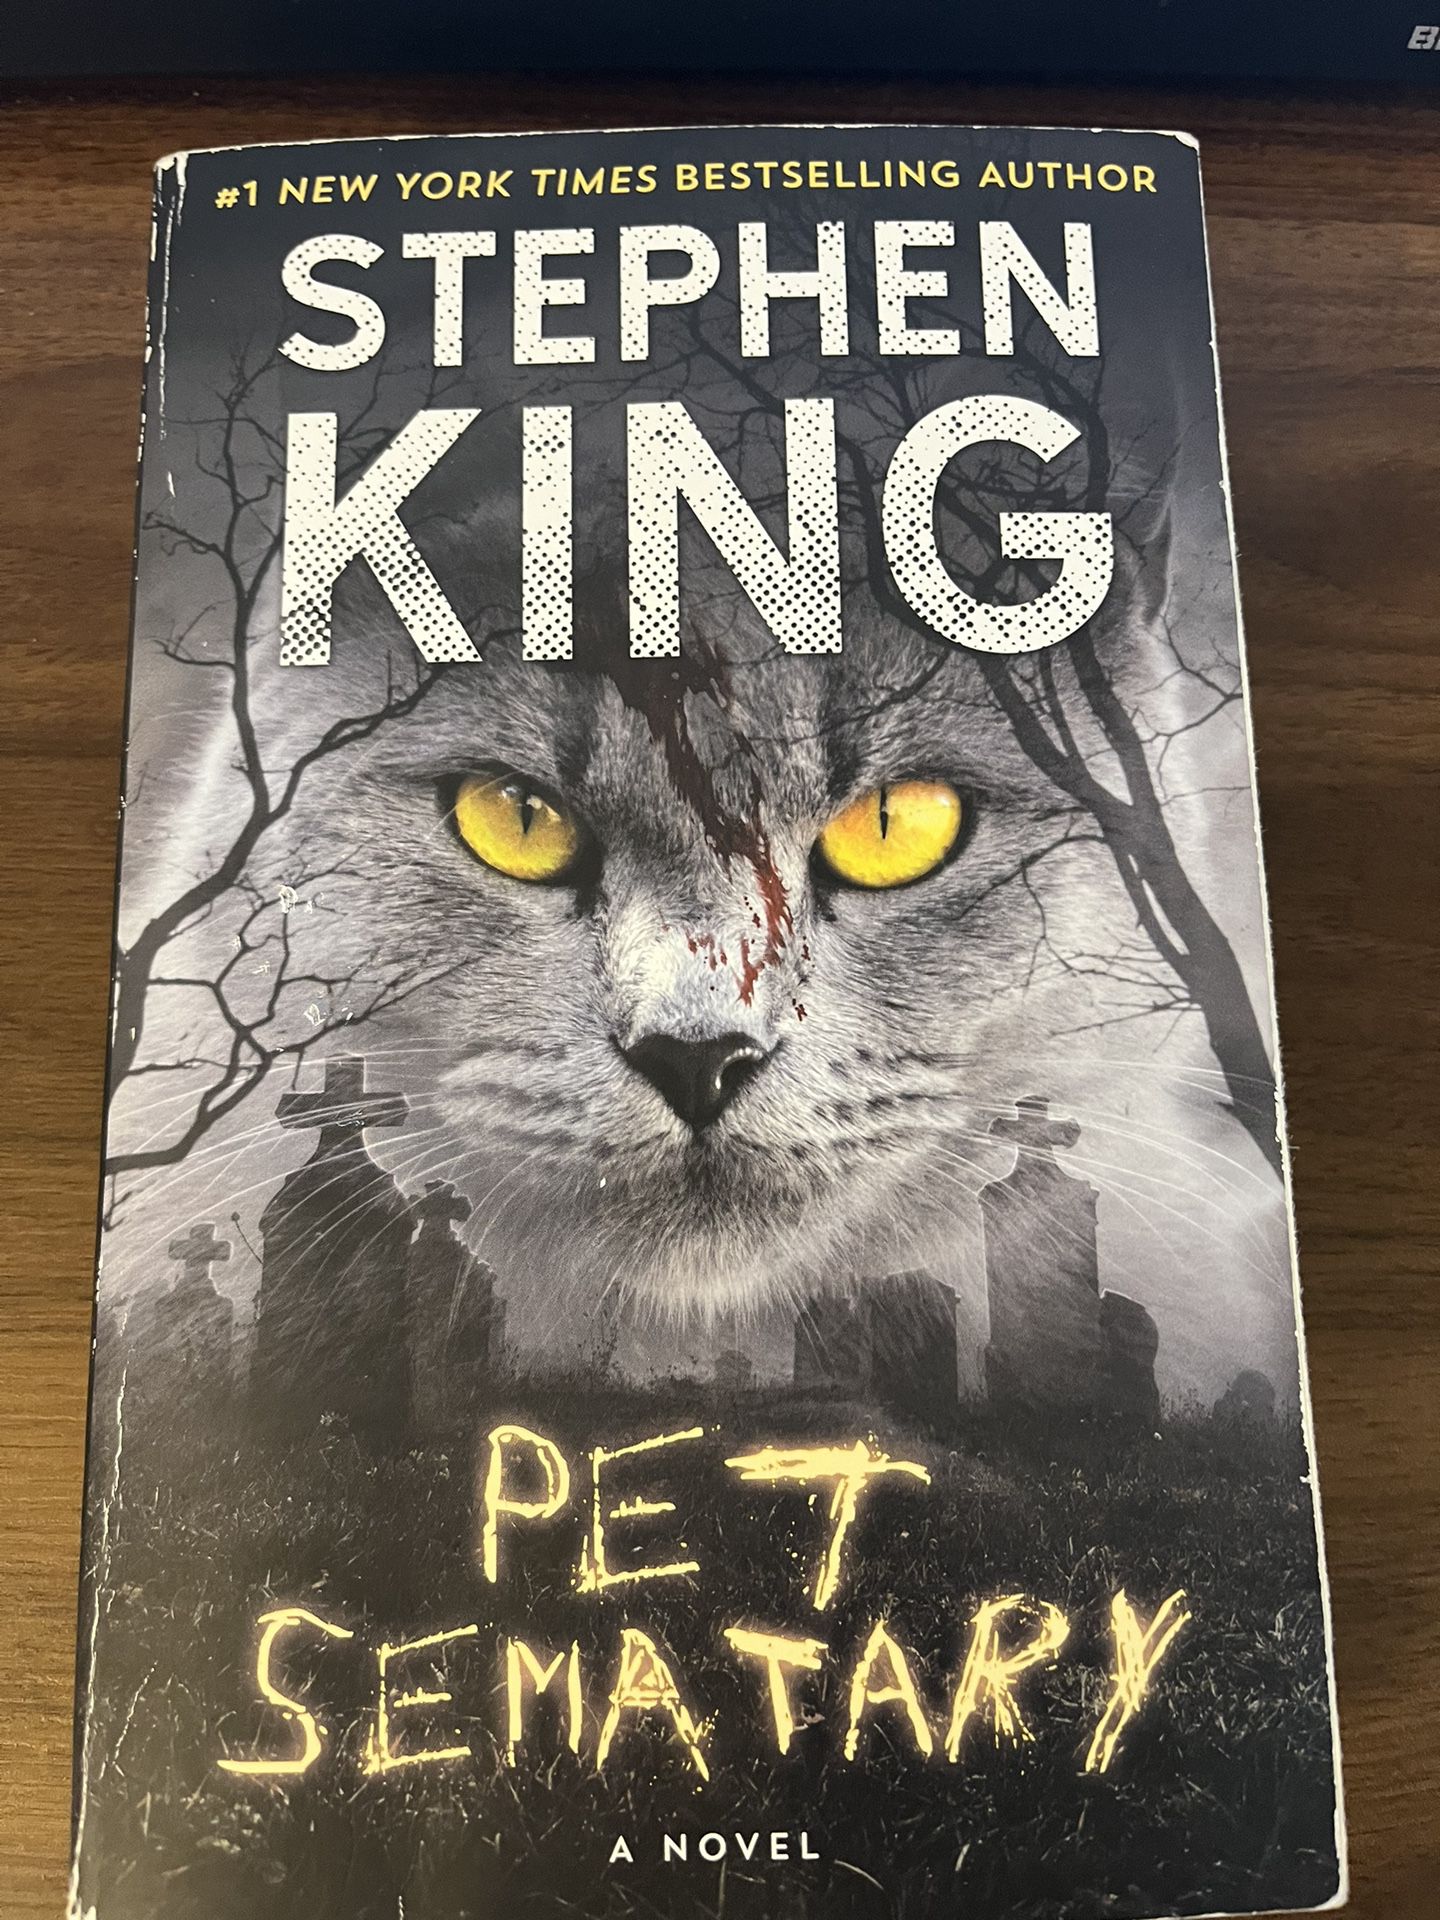 Paperback Copy Of Pet Sematary By Stephen King